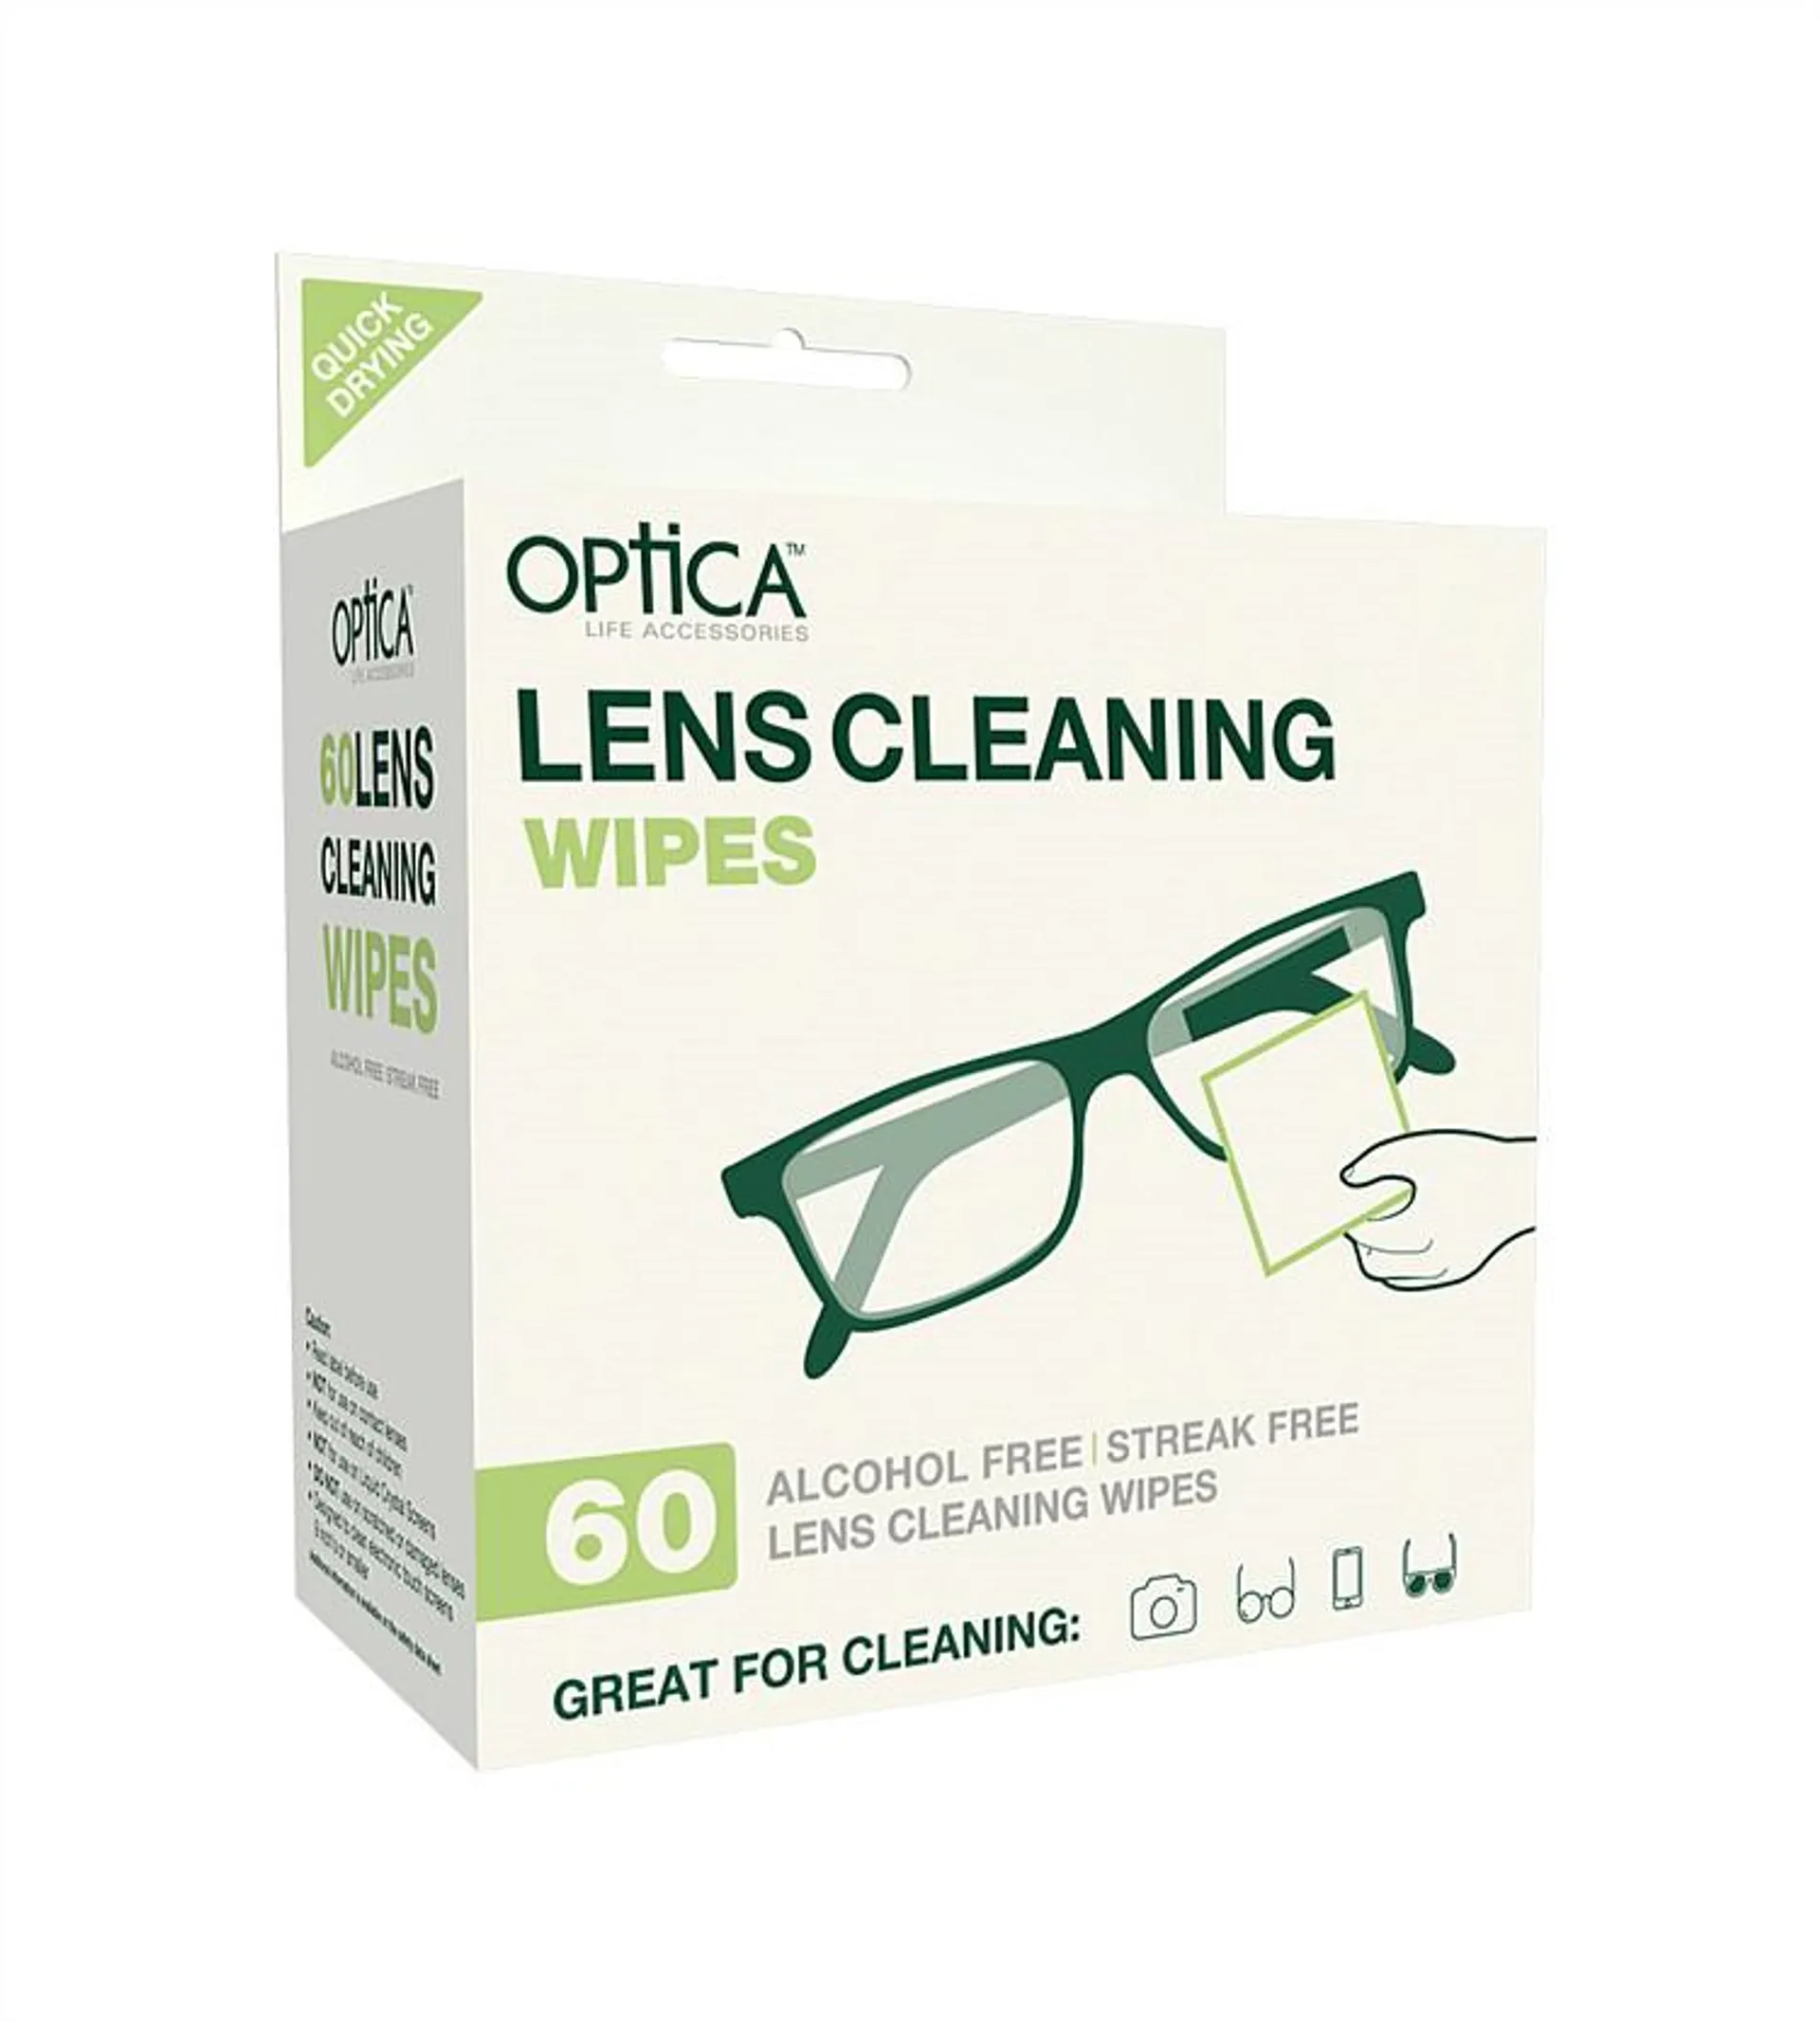 Optica Lens Cleaning Wipes 60s